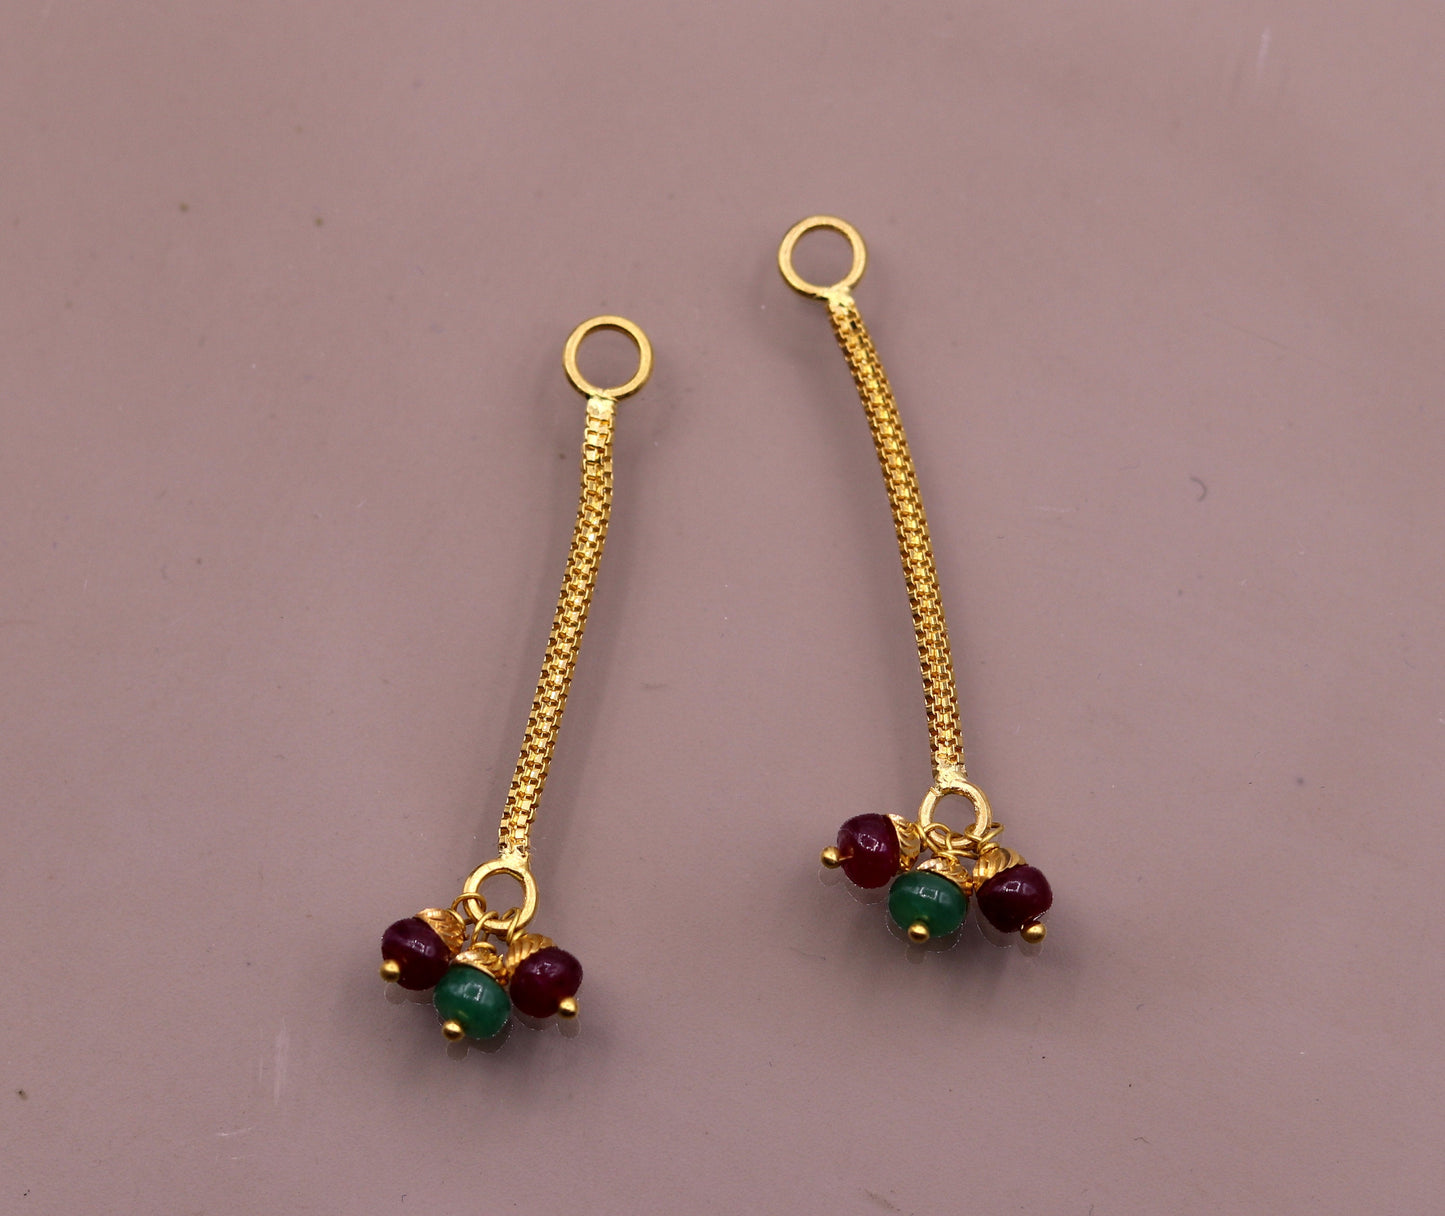 22kt yellow gold handmade fabulous Stud earrings jack or jacket for stud dangling or hanging amazing color beads Earring hanging - TRIBAL ORNAMENTS